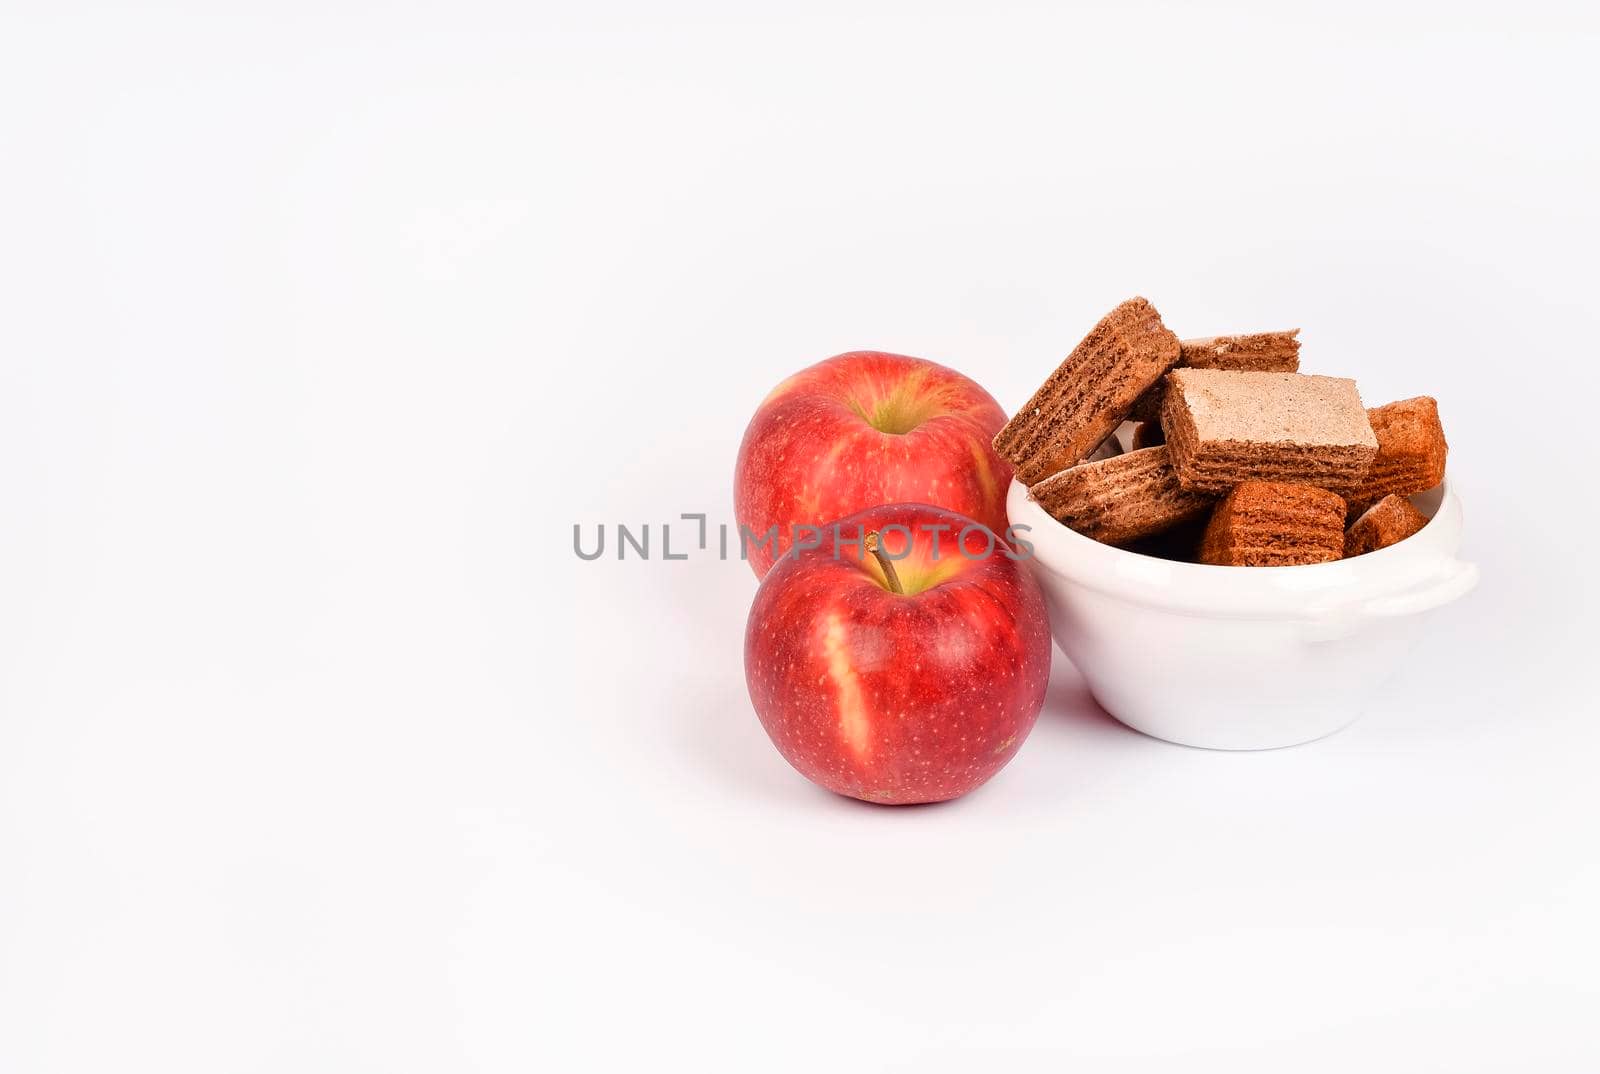 Apple pastila isolated on white background. Healthy snack concept. Pastila in a white bowl and red apple isolated.